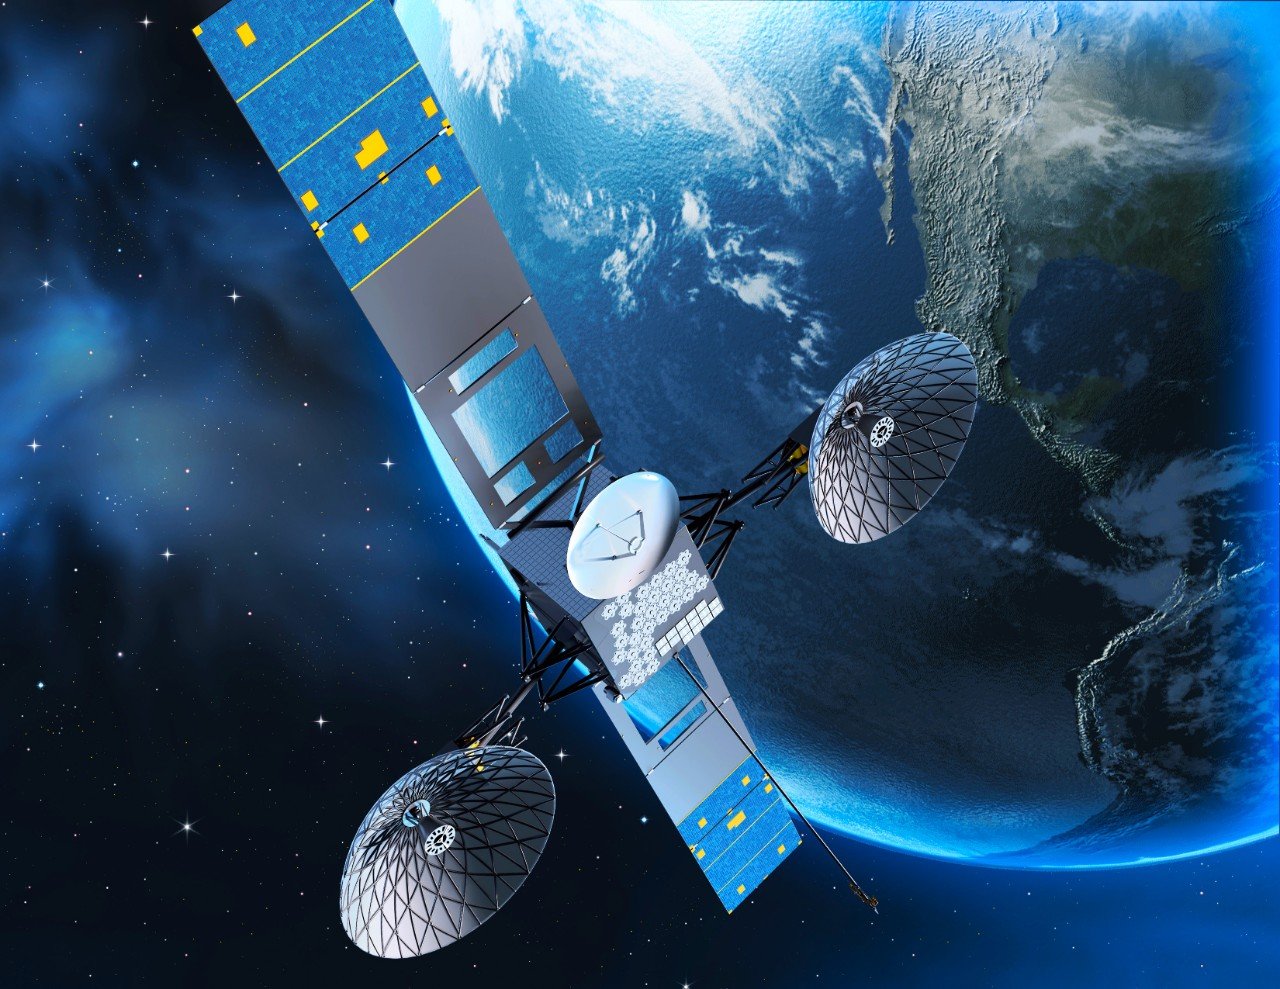 An artist rendering of a NASA Tracking and Data Relay Satellite (TDRS) in orbit. TDRS provides a vital communications link between ground facilities and the International Space Station, the Hubble Space Telescope and a host of Earth science satellites. The agency would decommission TDRS to enable commercial providers to support future near-Earth communication mission requirements. Credits: NASA